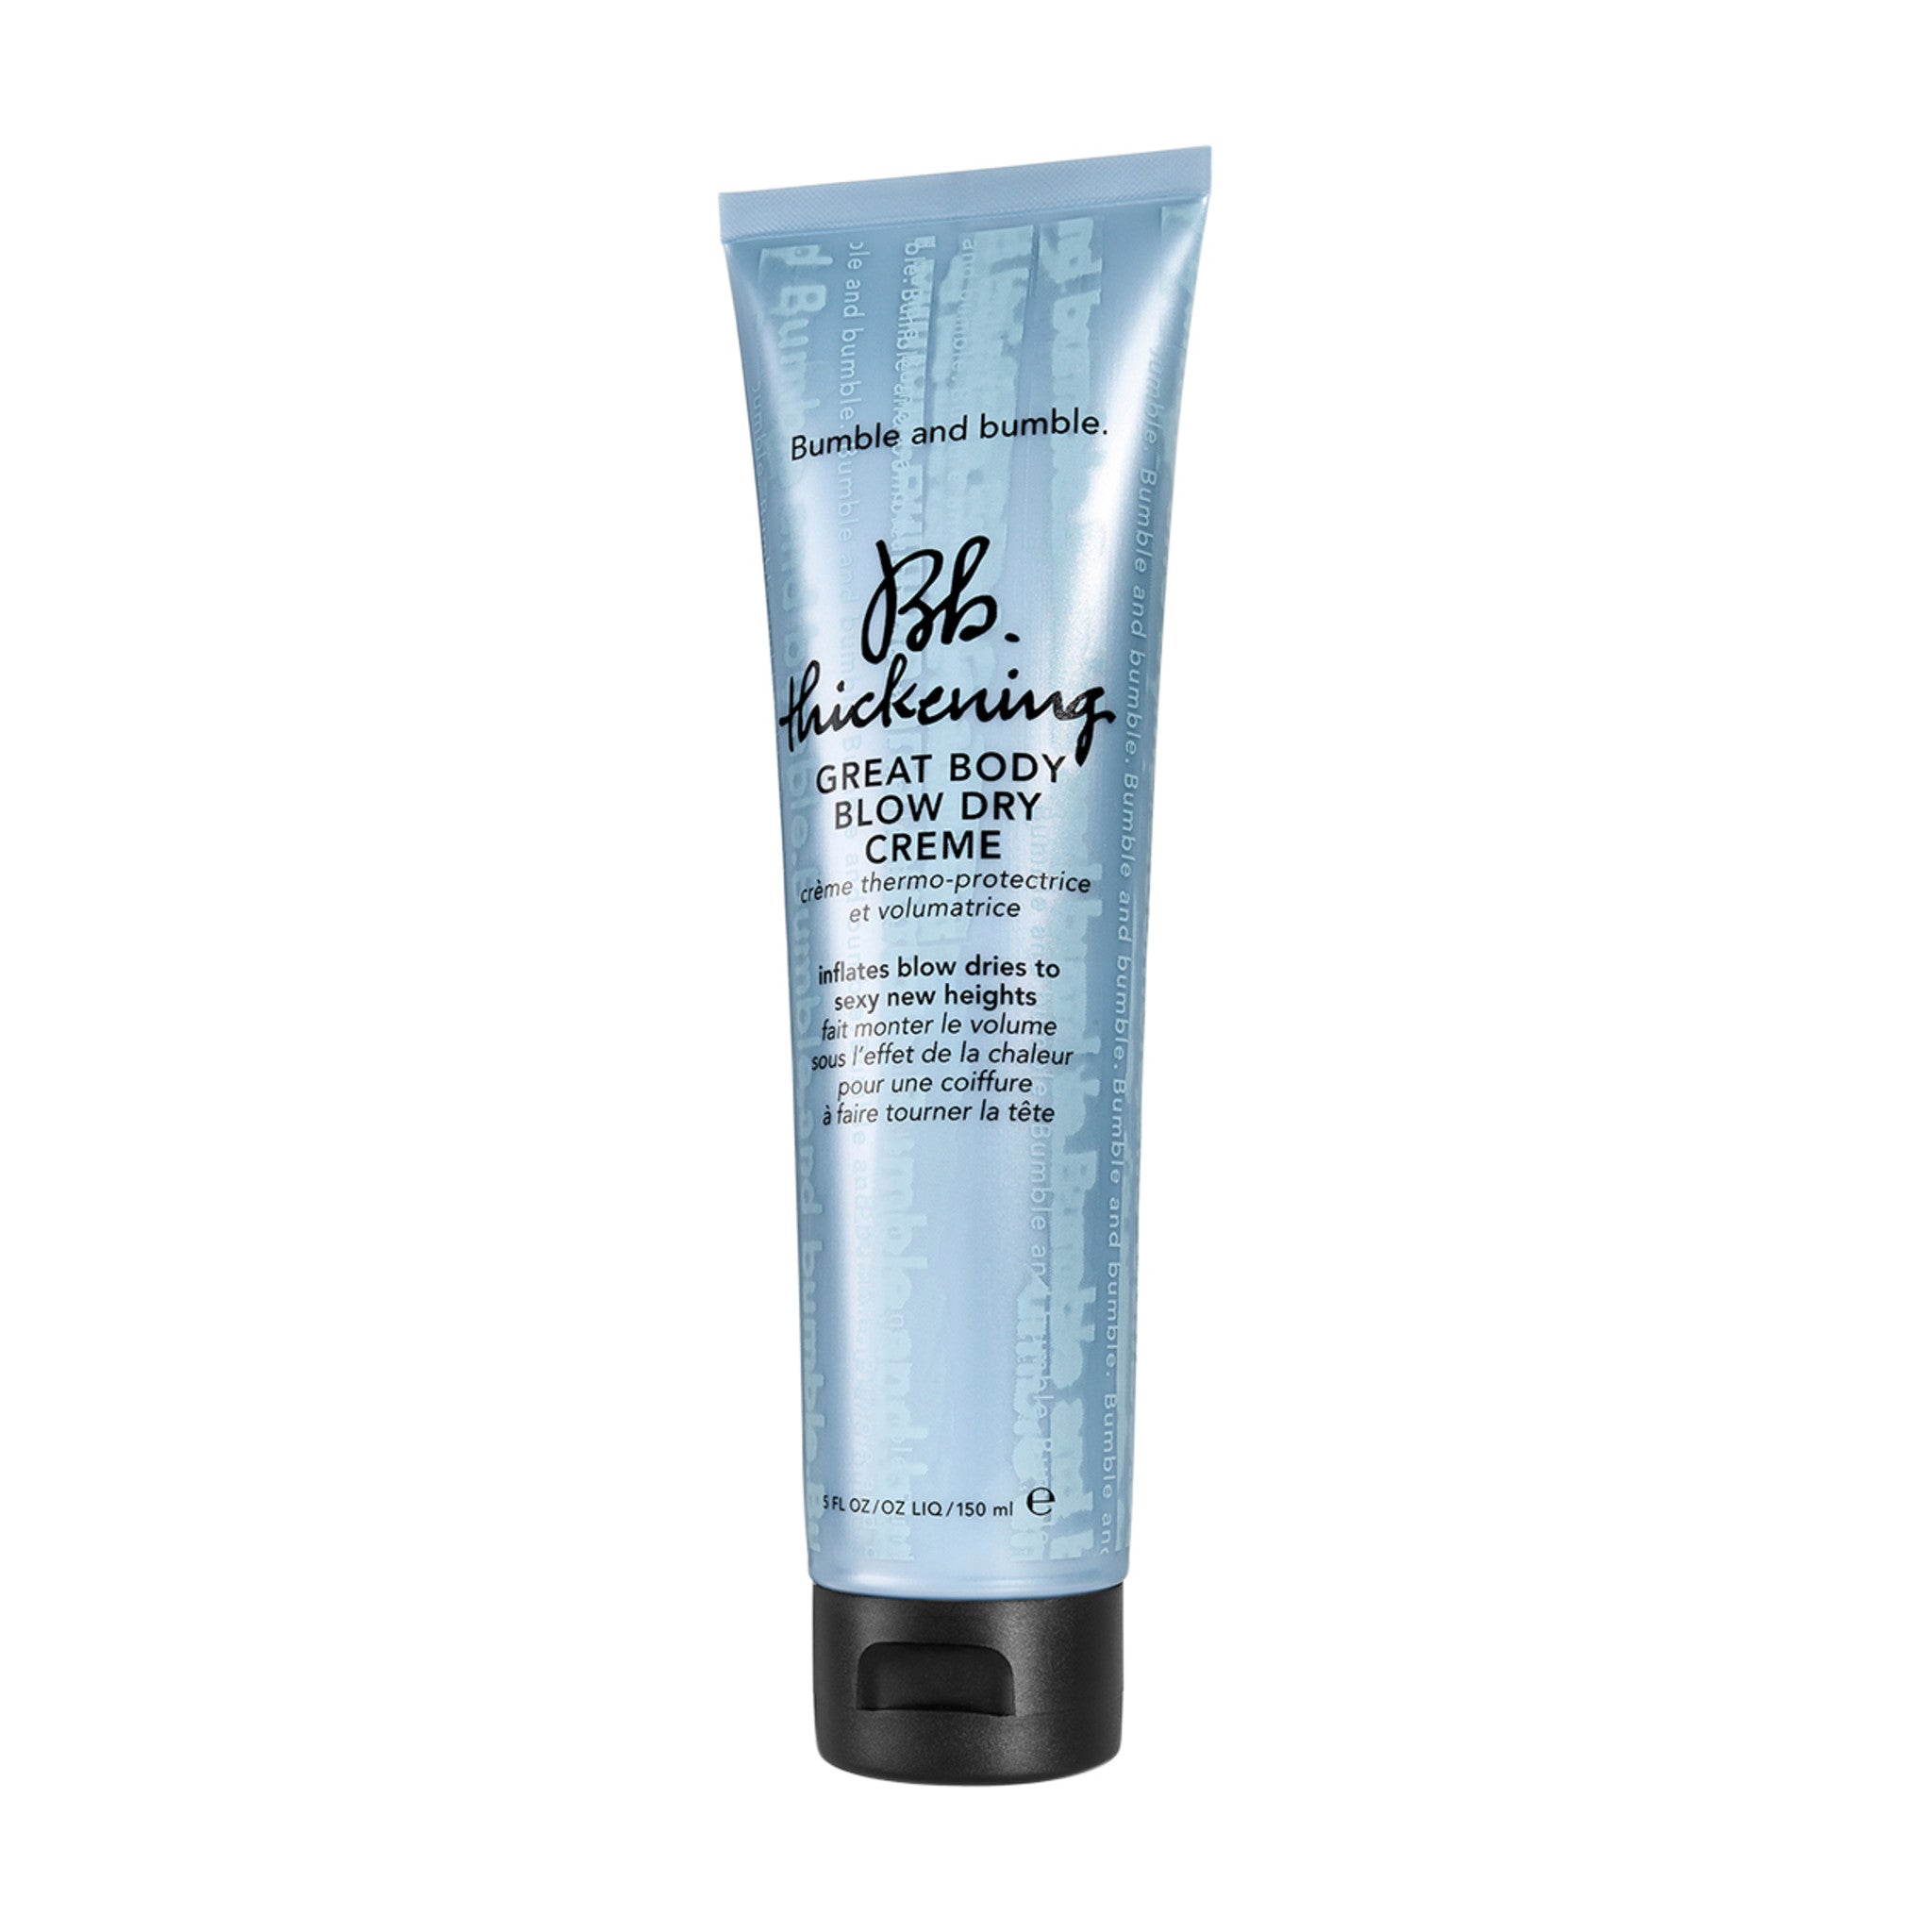 Bumble and Bumble Thickening Great Body Blow Dry Crème Size variant: 5 oz main image.